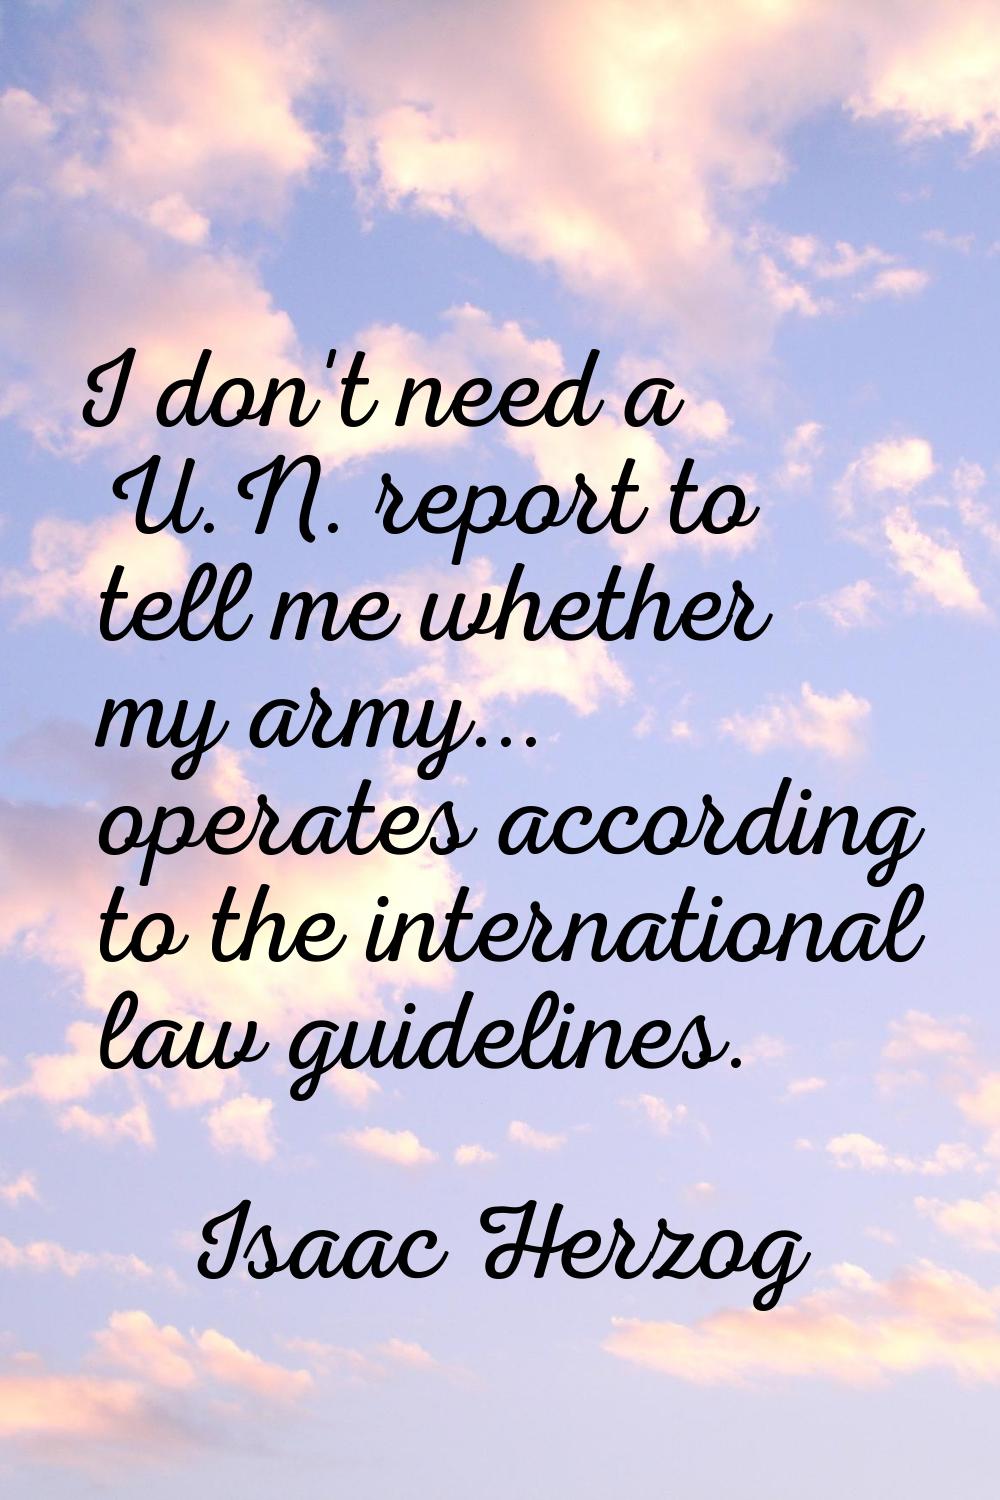 I don't need a U.N. report to tell me whether my army... operates according to the international la